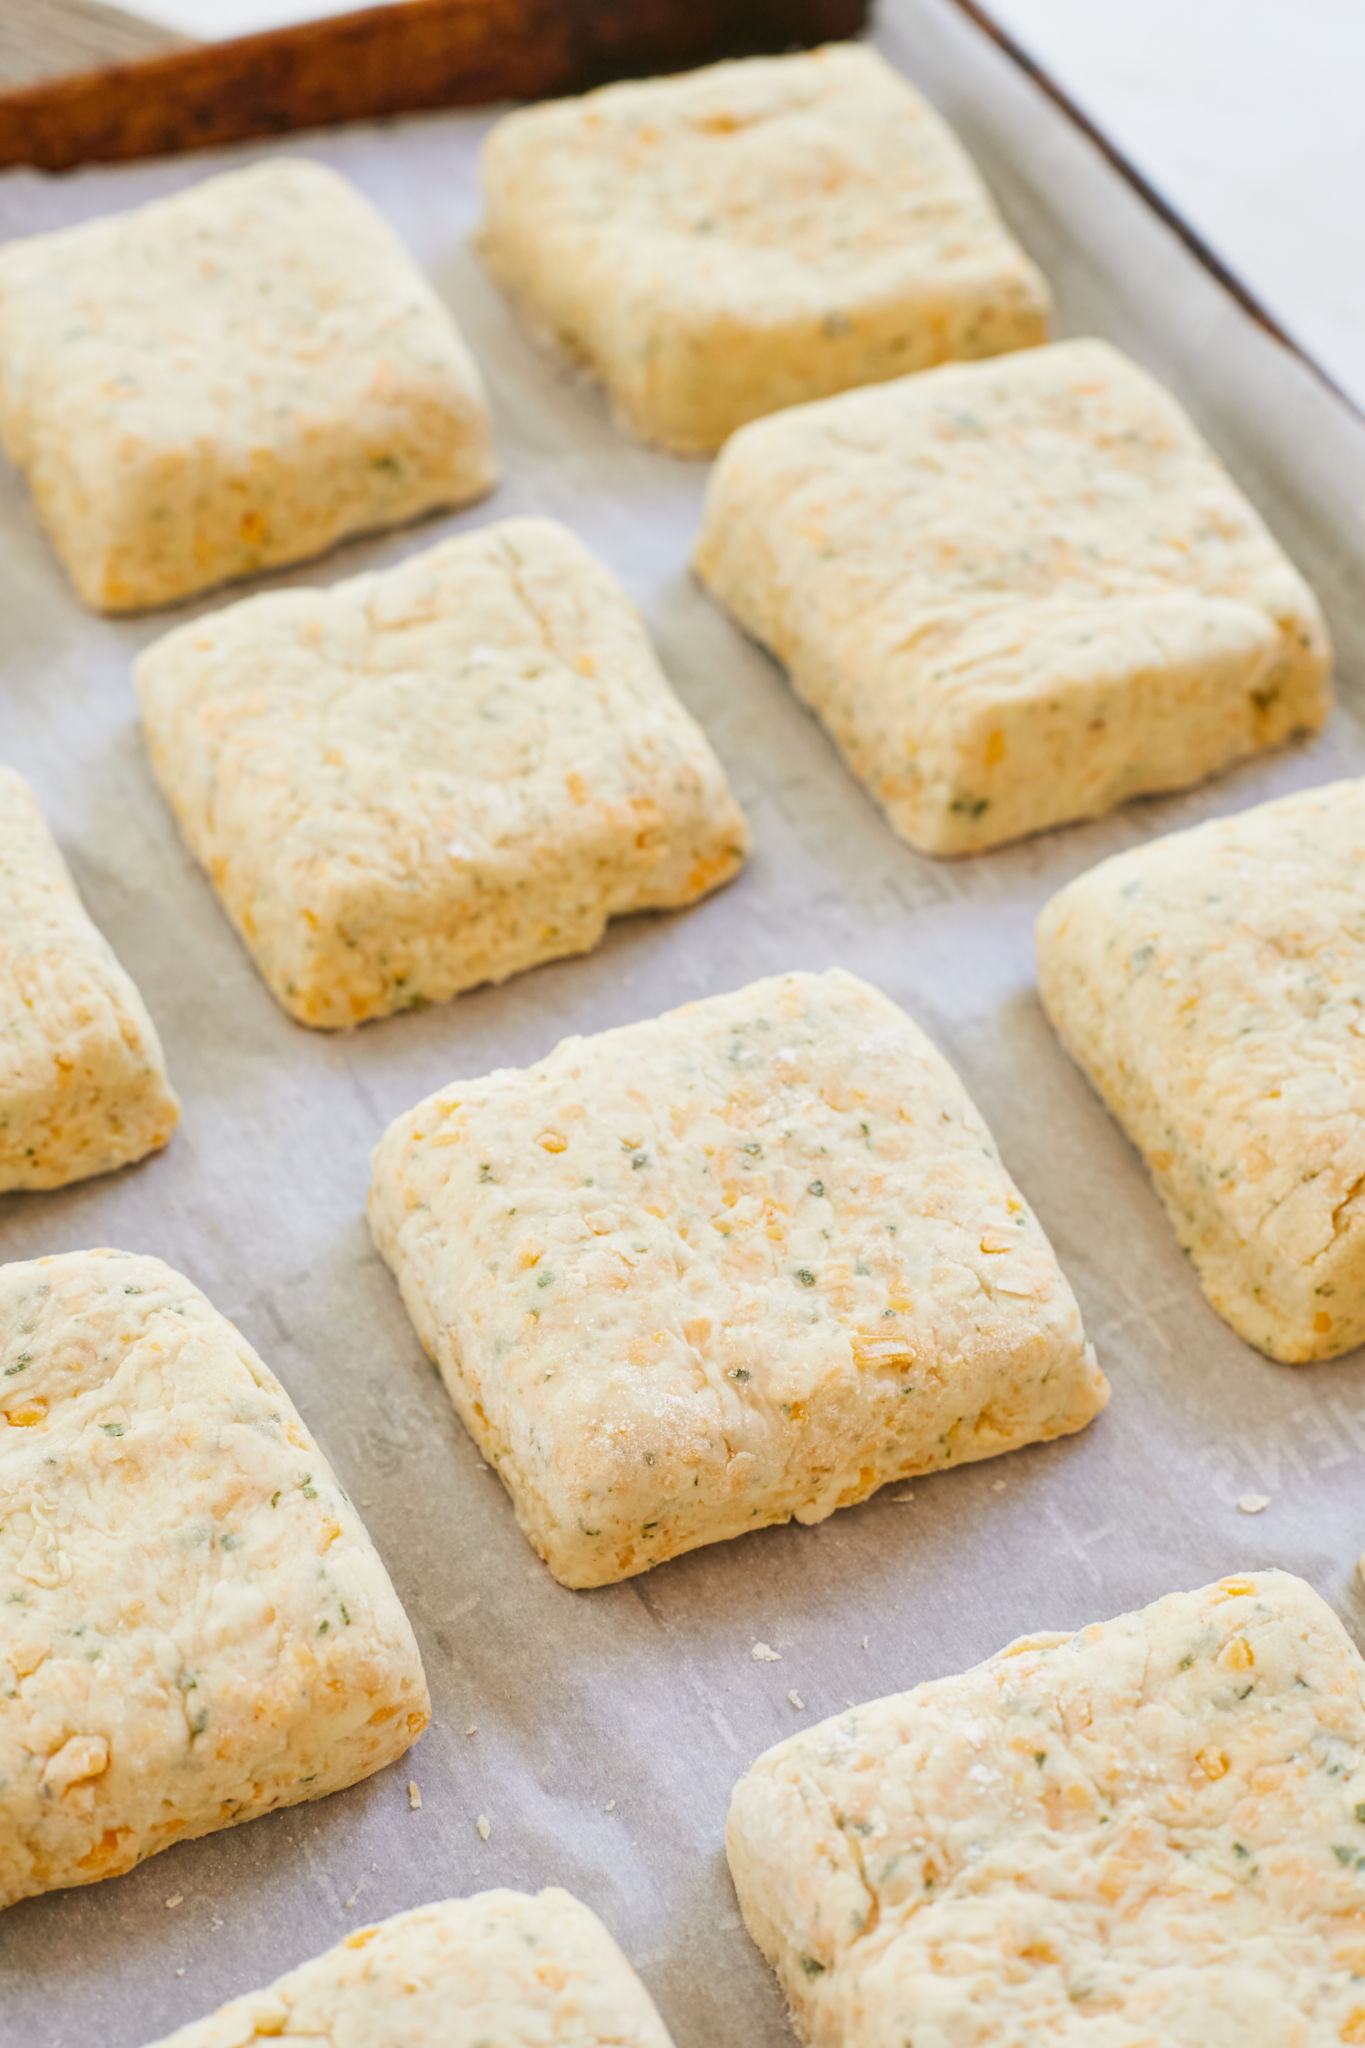 Unbaked sage and cheddar biscuits ready for baking.